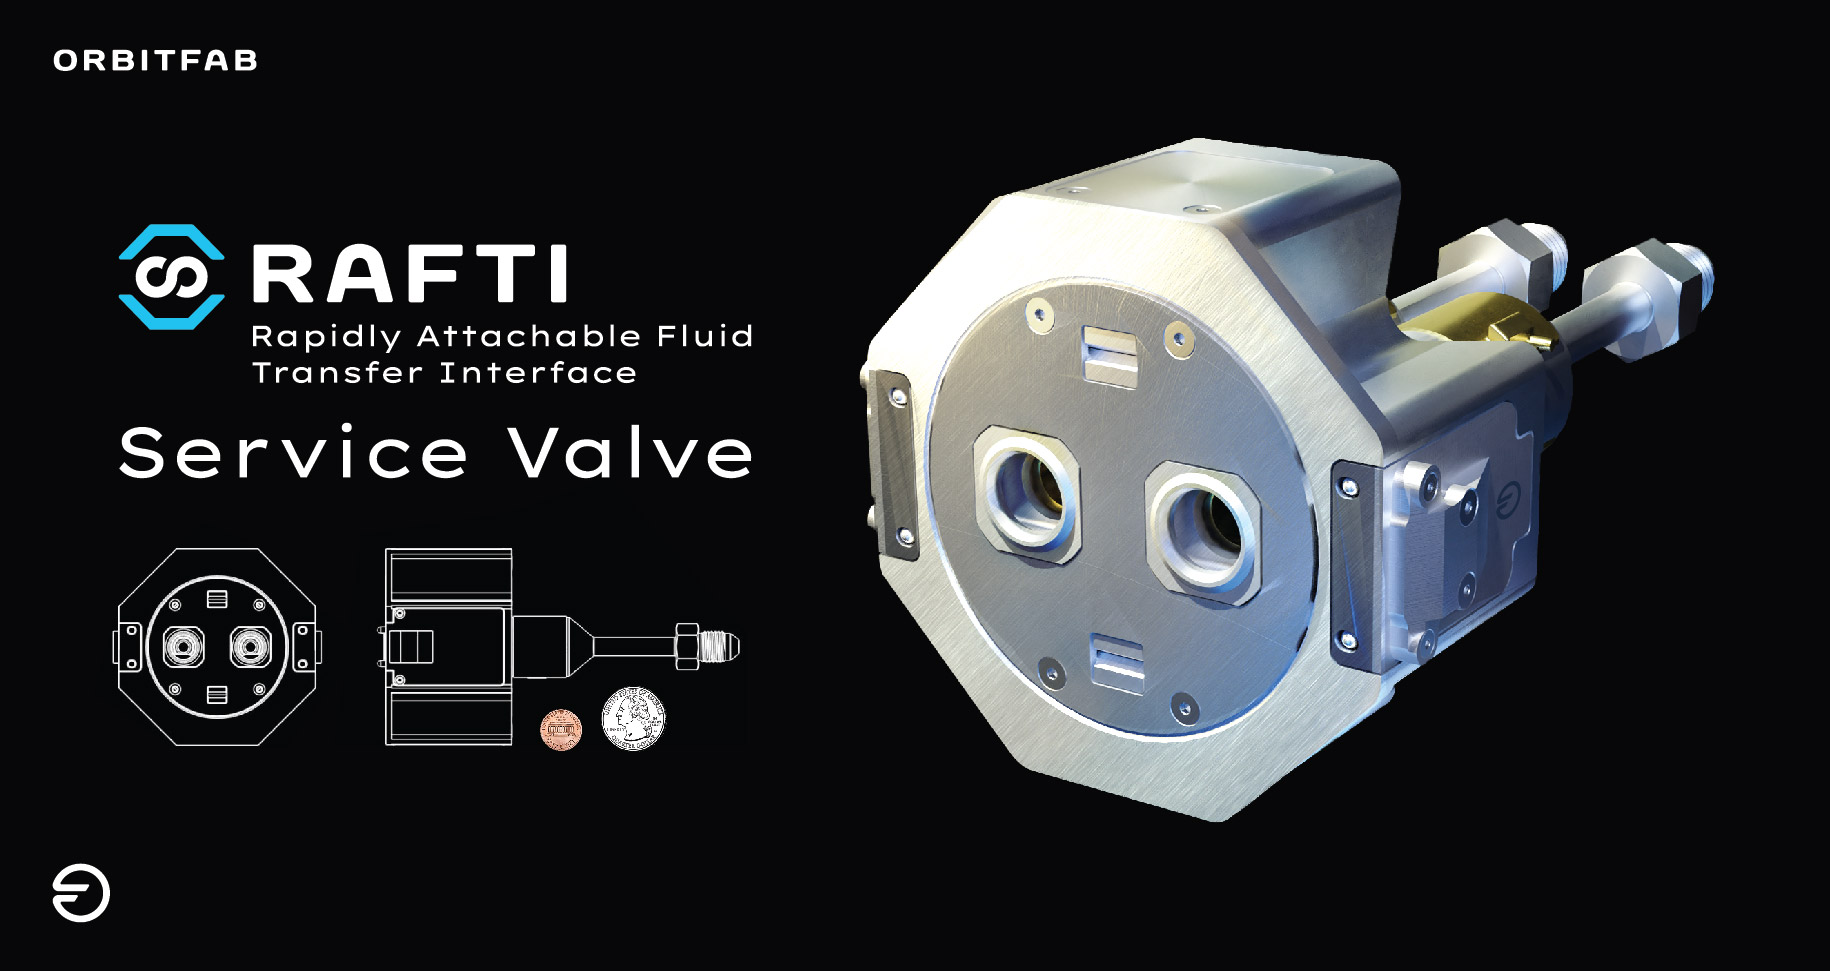 Orbit Fab's RAFTI (Rapidly Attachable Fuel Transfer Interface) Service Valve that enables satellite to be refuel on-orbit. height=100% width=100%